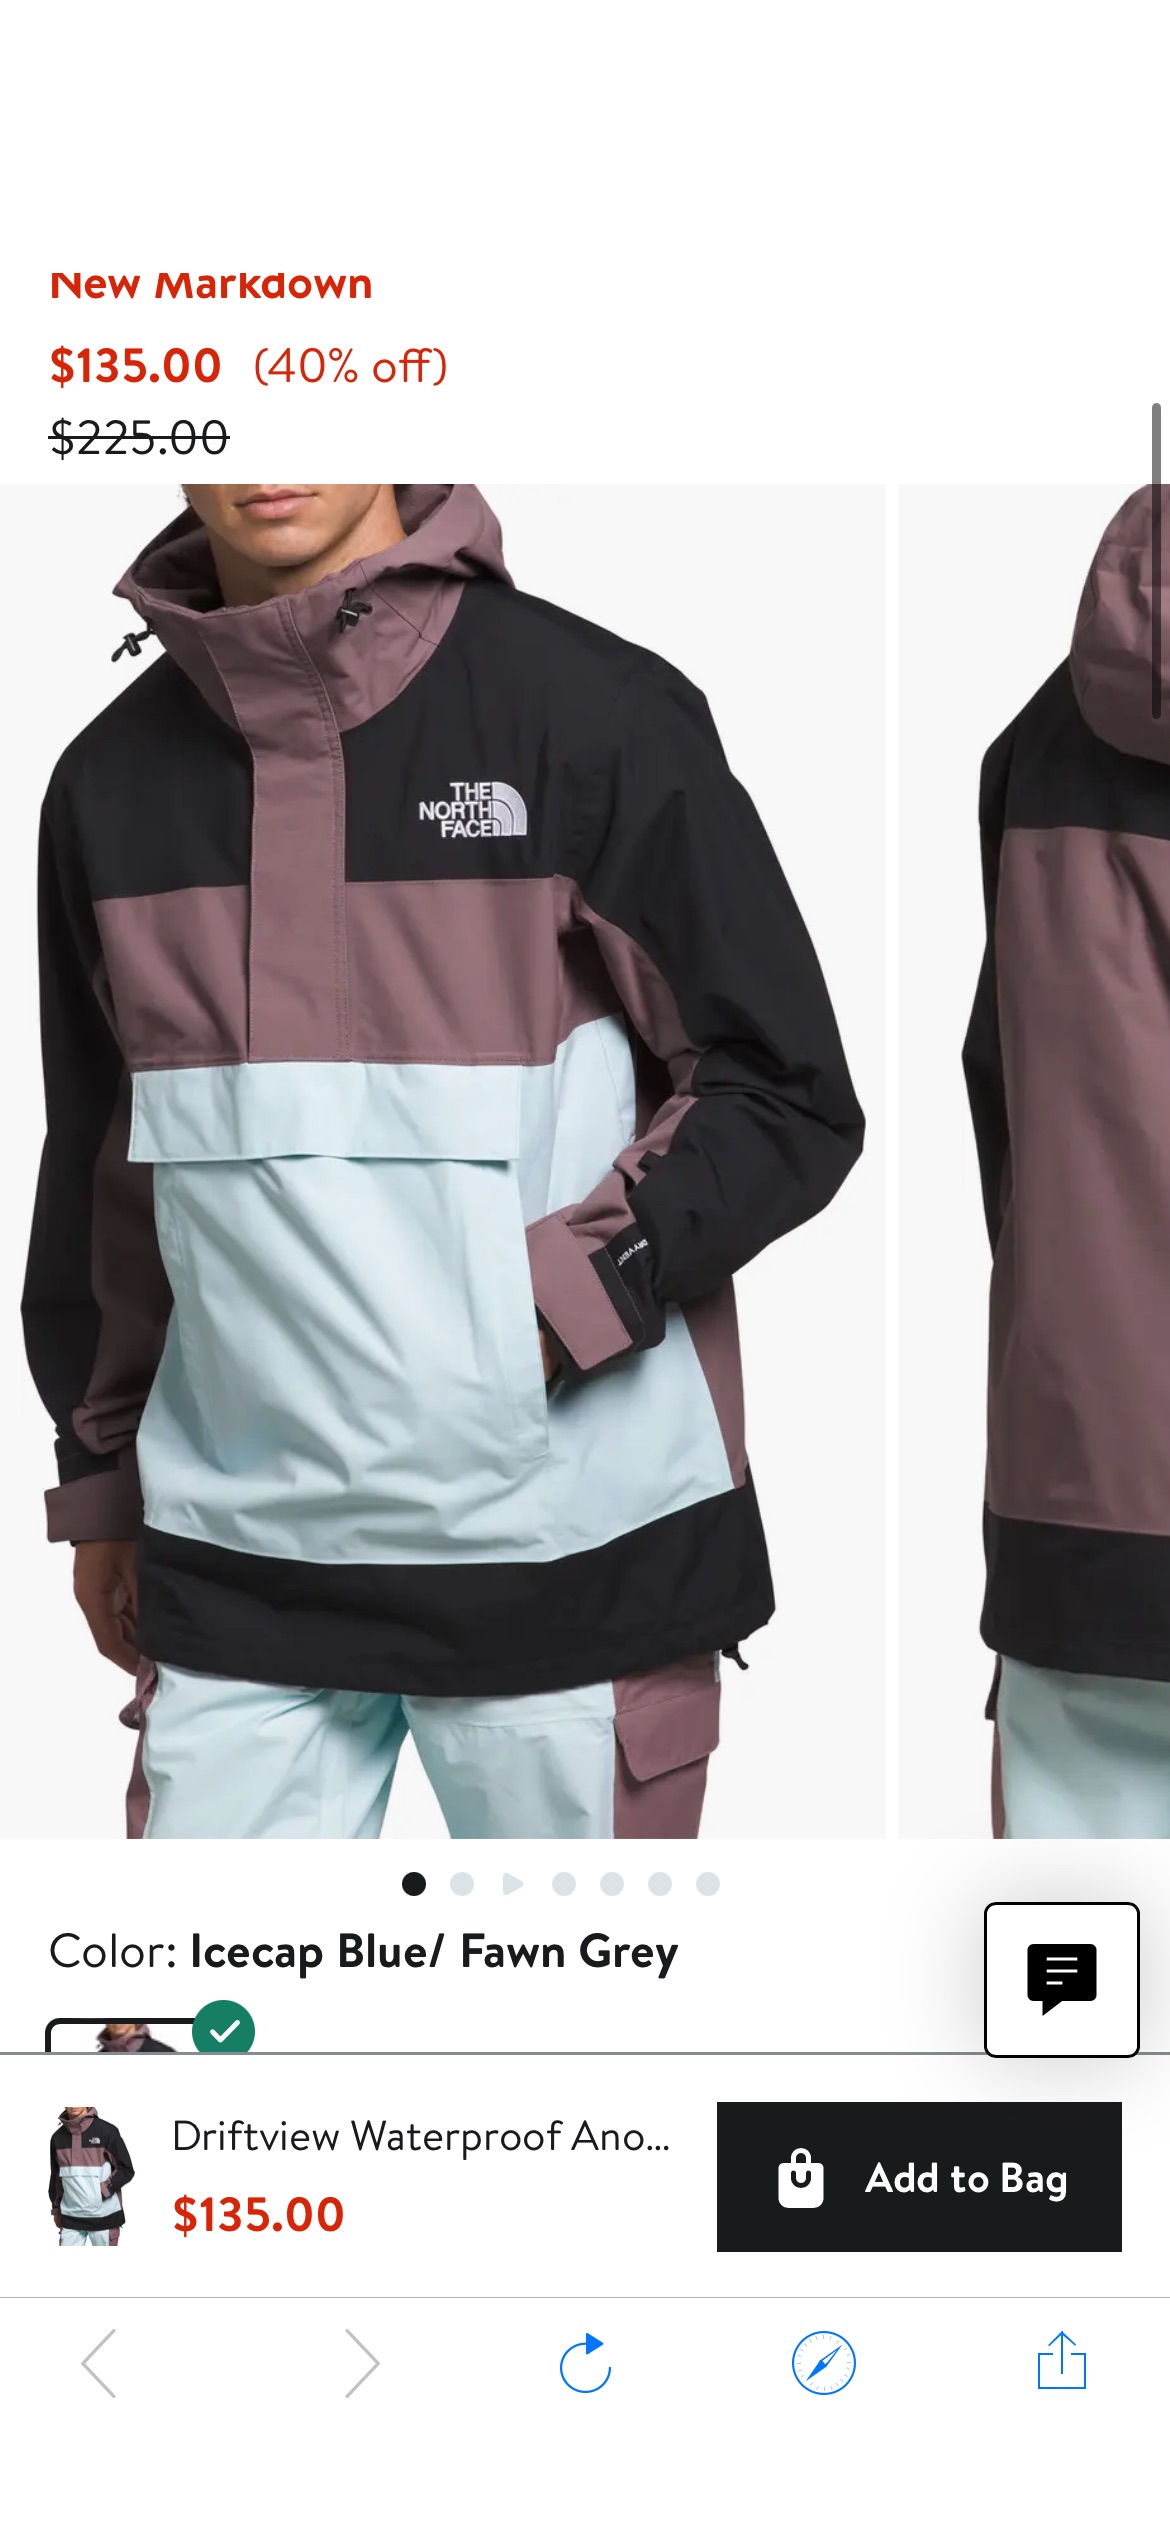 The North Face Driftview Waterproof Anorak | Nordstrom